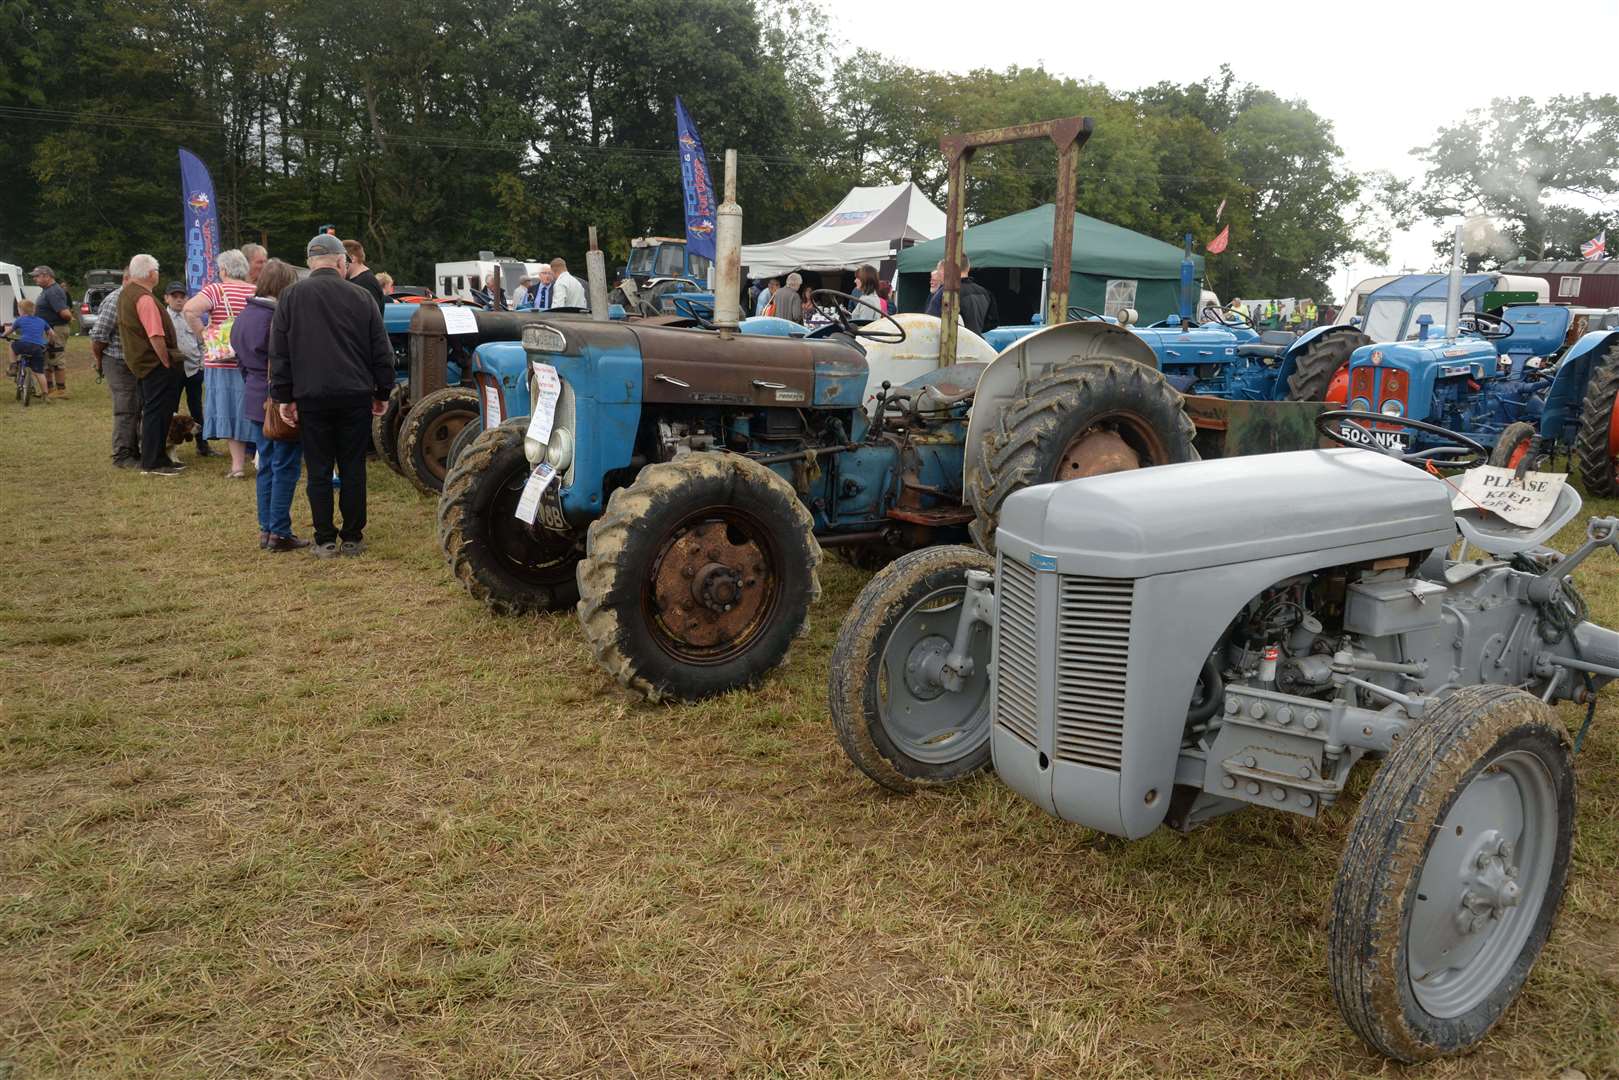 Vintage and classic tractors at the Biddenden Tractorfest Picture: Chris Davey